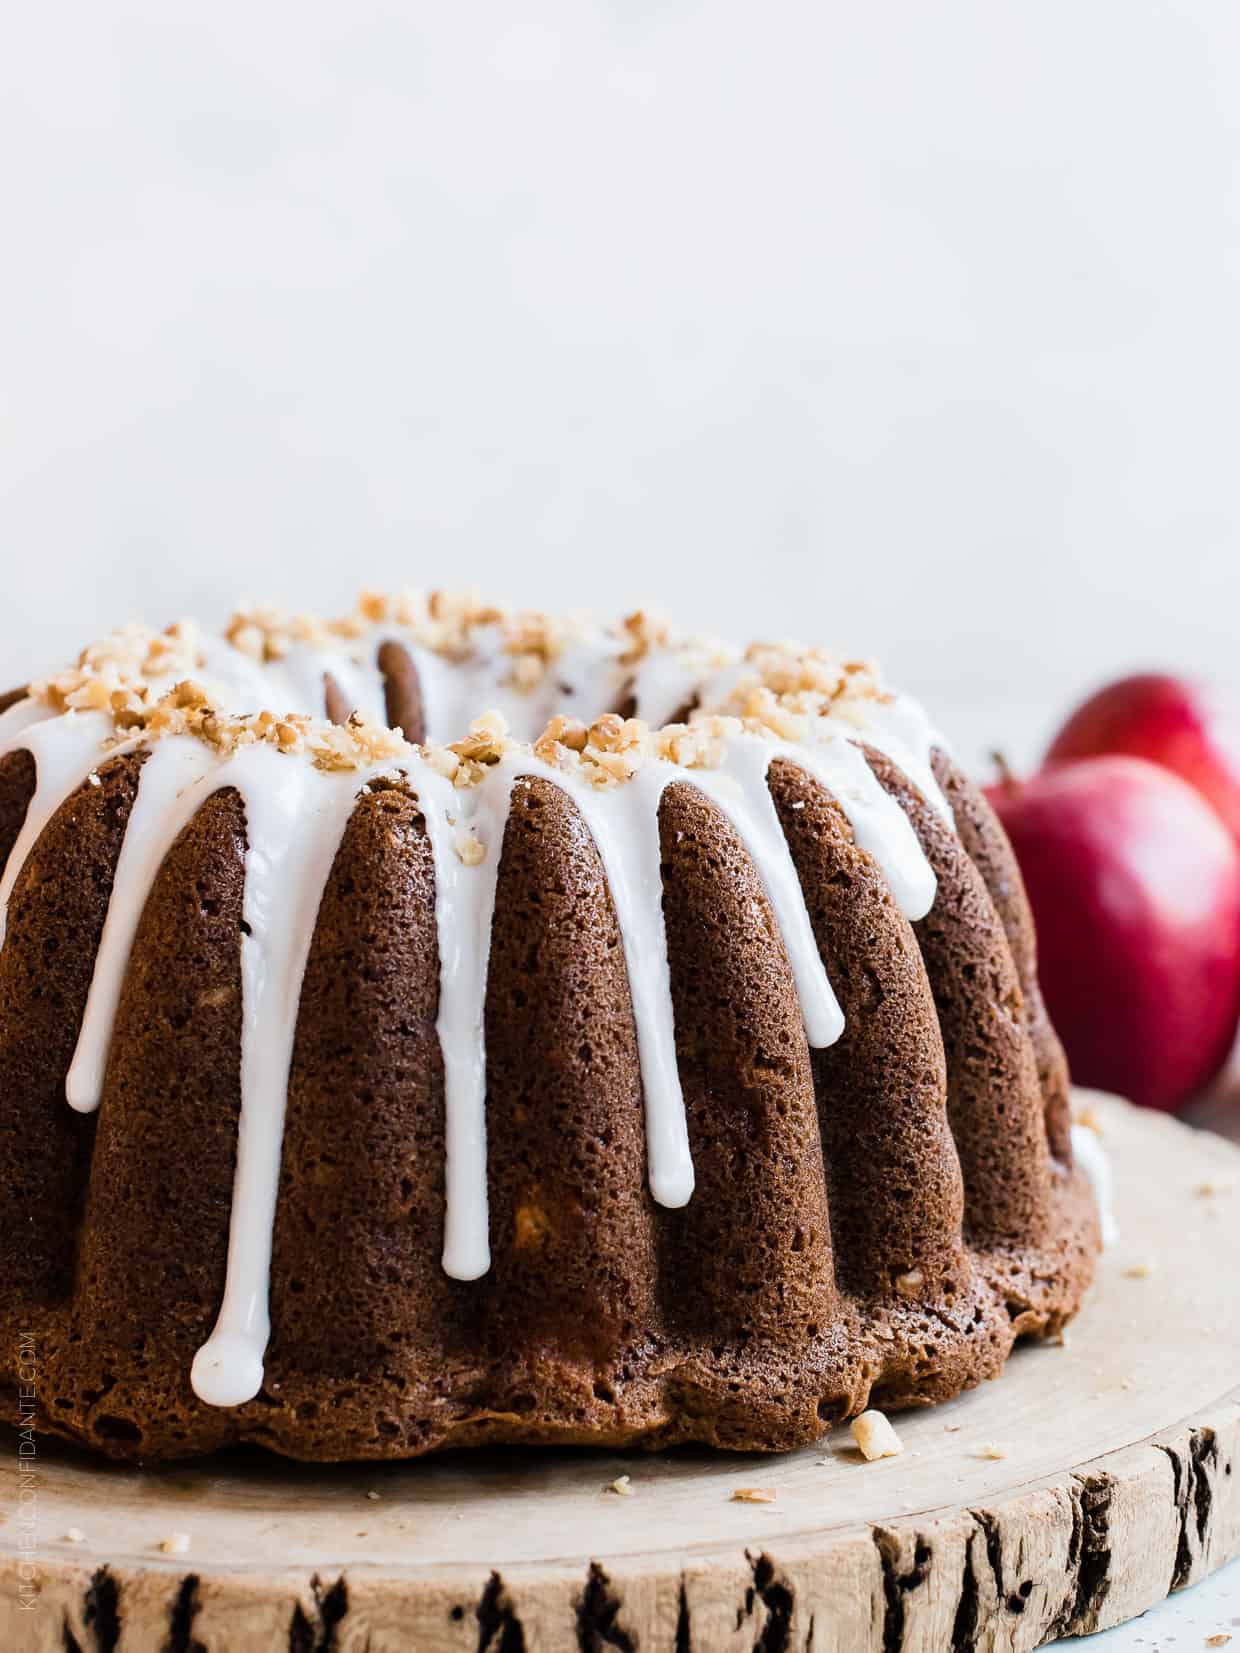 Apple Walnut Cake with apples in the background.